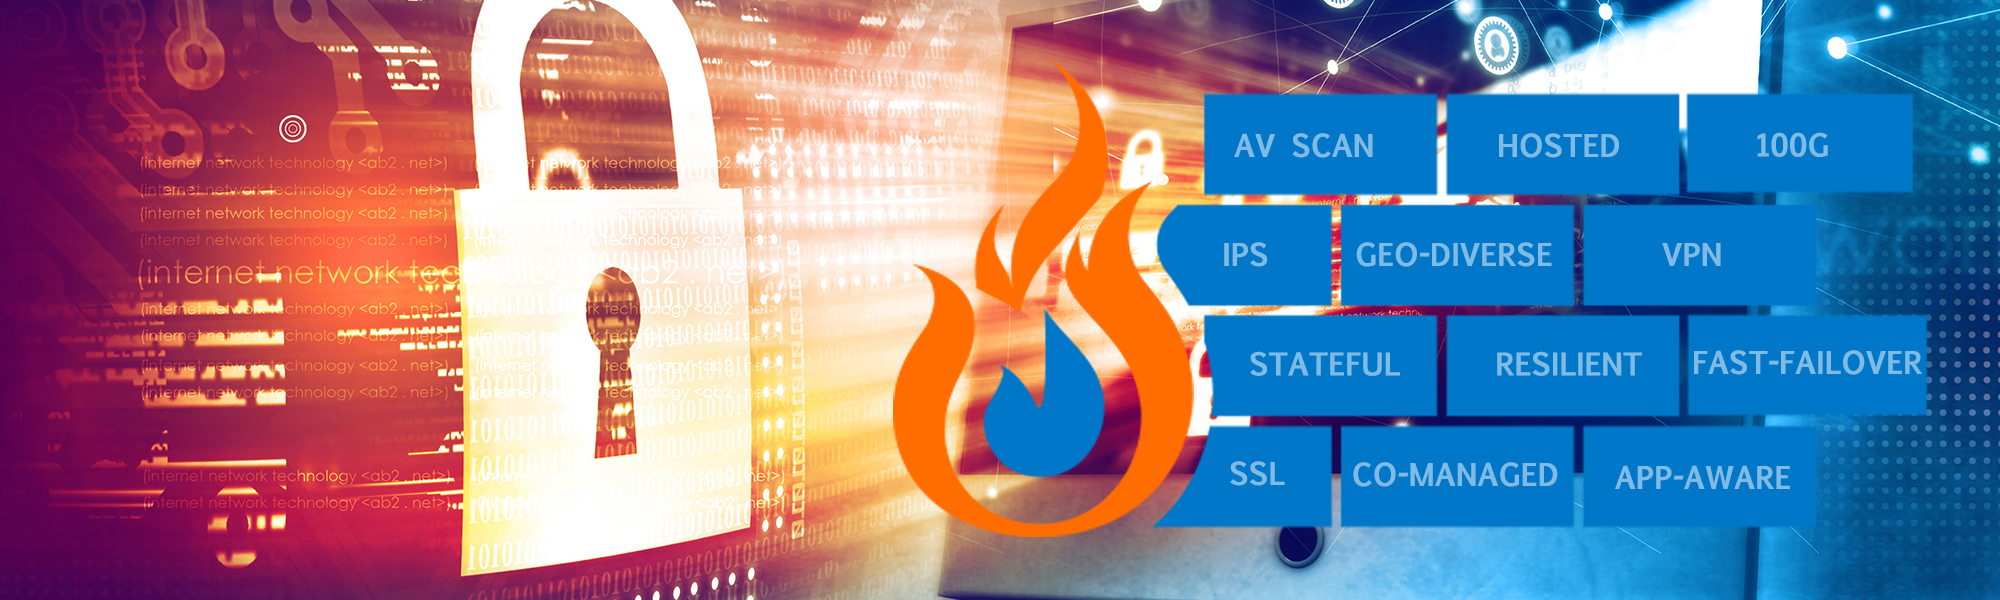 Graphic background with image of a lock, graphic of a fire next to a number of blocks that read: AV Scan, Hosted, 100G, IPS, Geo-diverse, VPN, Stateful, Resilient, Fast-Failover, SSL, Co-managed, App-aware